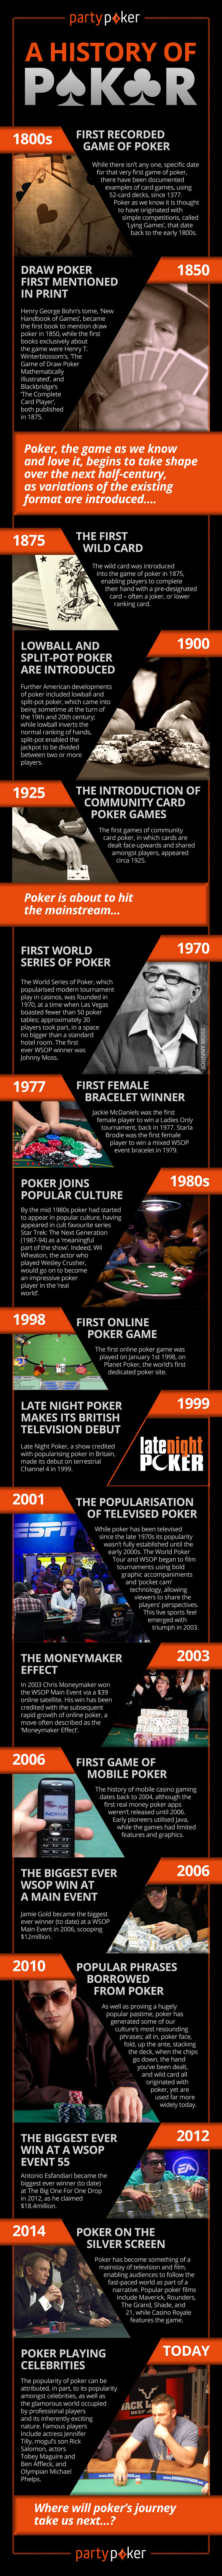 How Much Do You Know About the History of Poker?